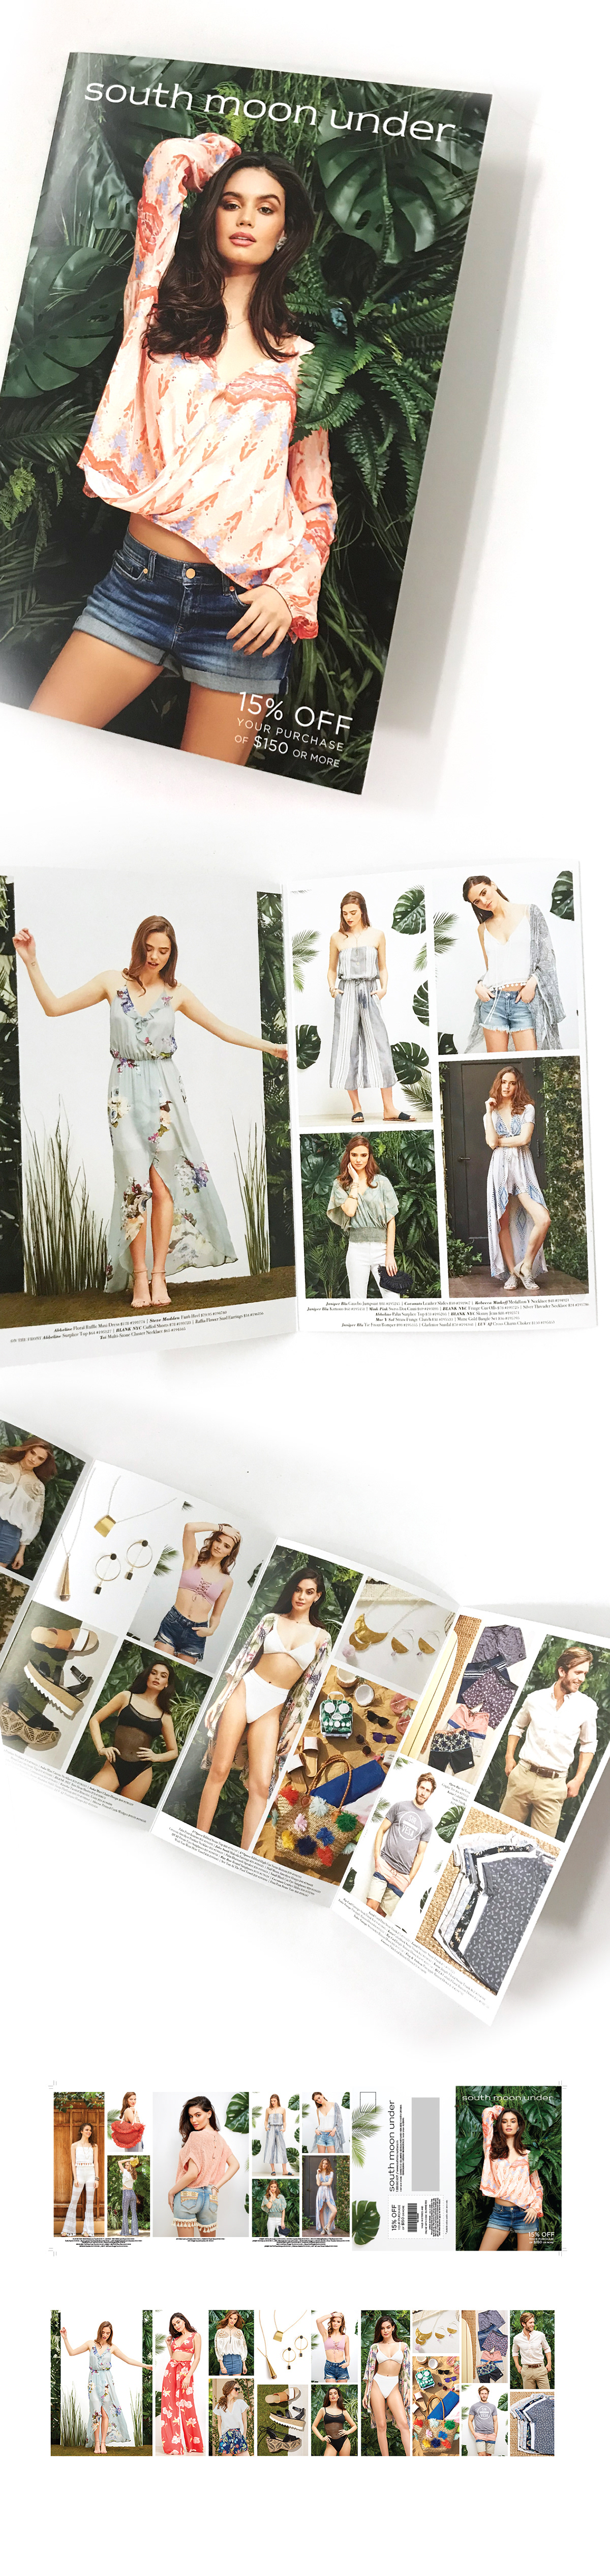 Fashion  marketing   Email mailers postcards promotions Signage